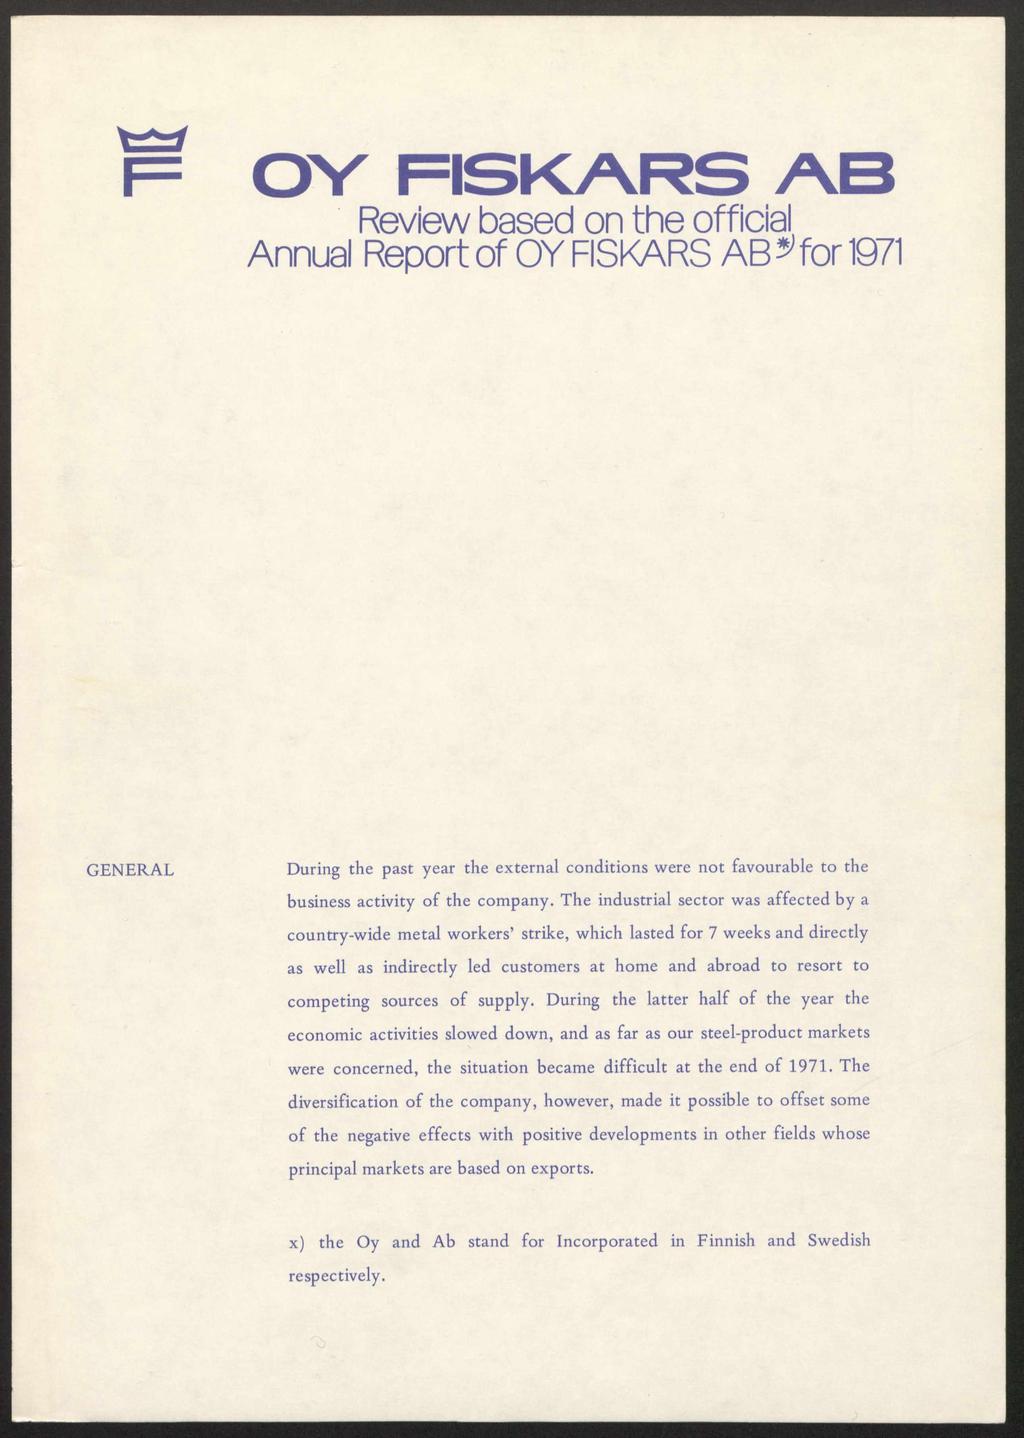 O V F IS K A R S A B Review based on the official Annual Report of OY FISKARS AB ^ for 1971 During the past year the external conditions were not favourable to the business activity o f the company.